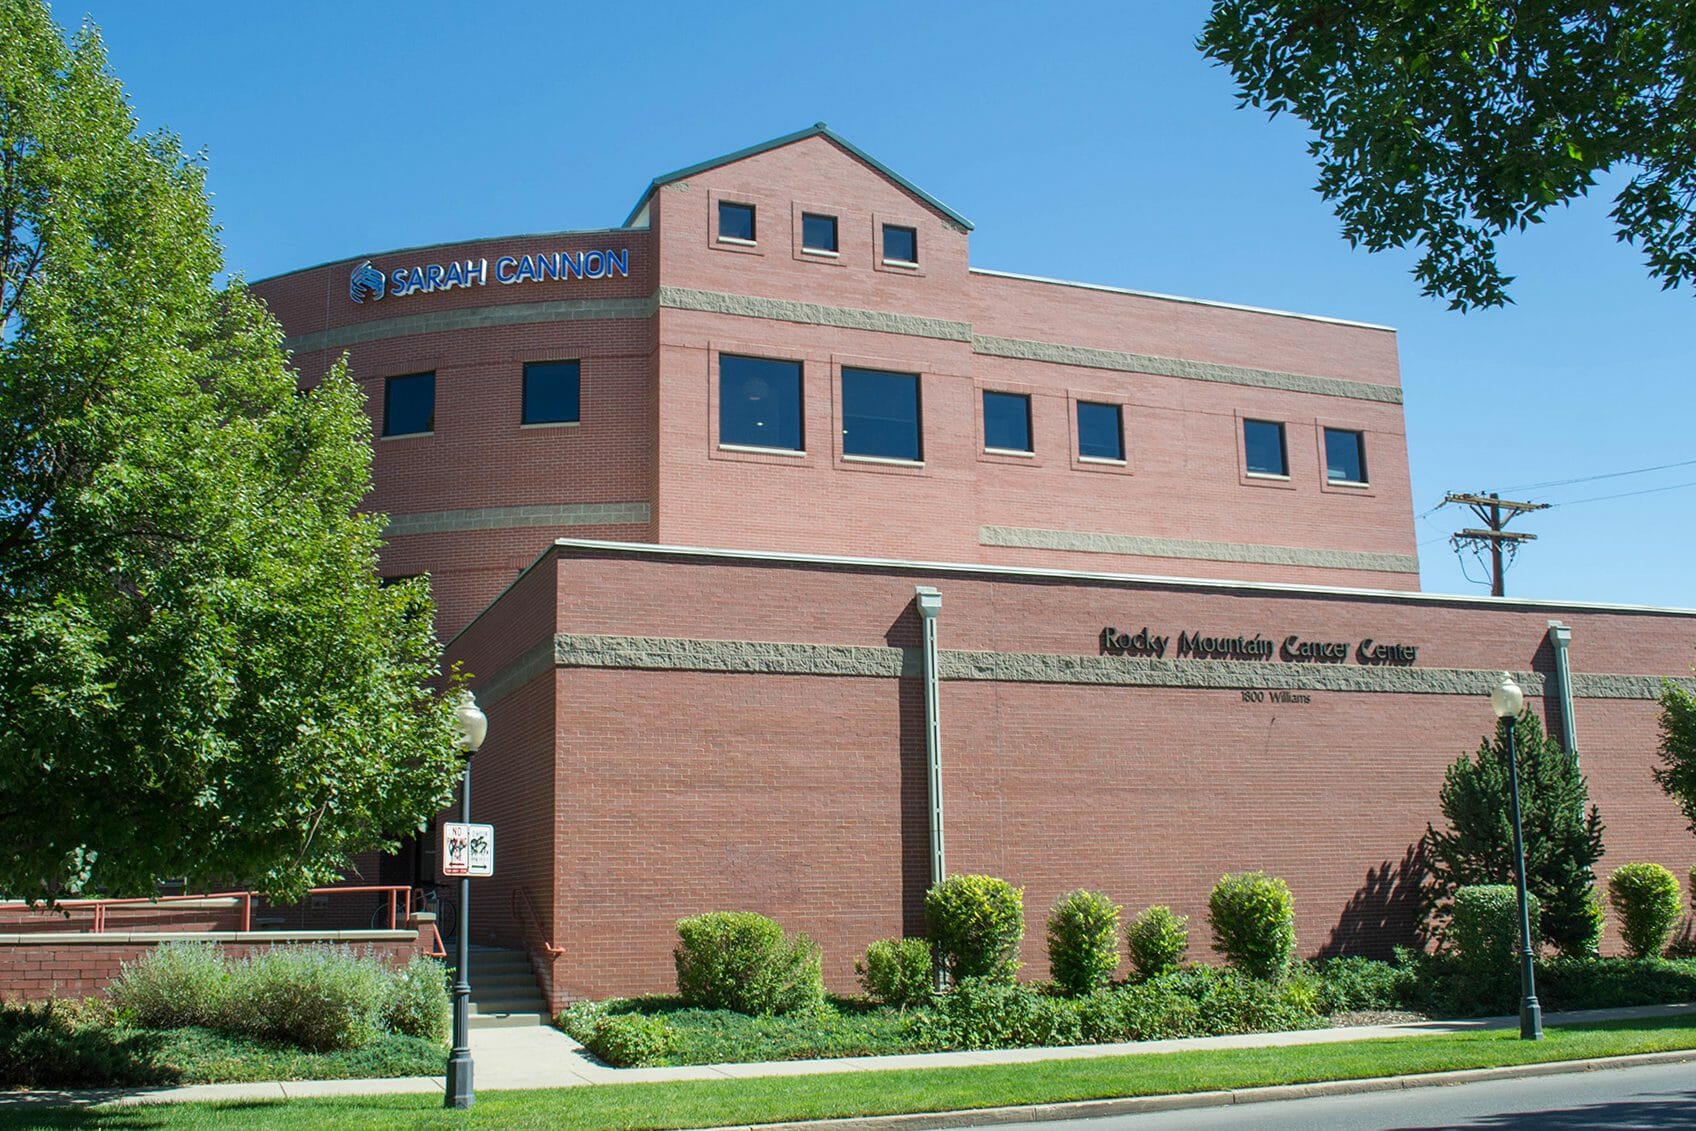 Street view of brick exterior of Rocky Mountain Cancer Center with sarah cannon research institute logo on top of building